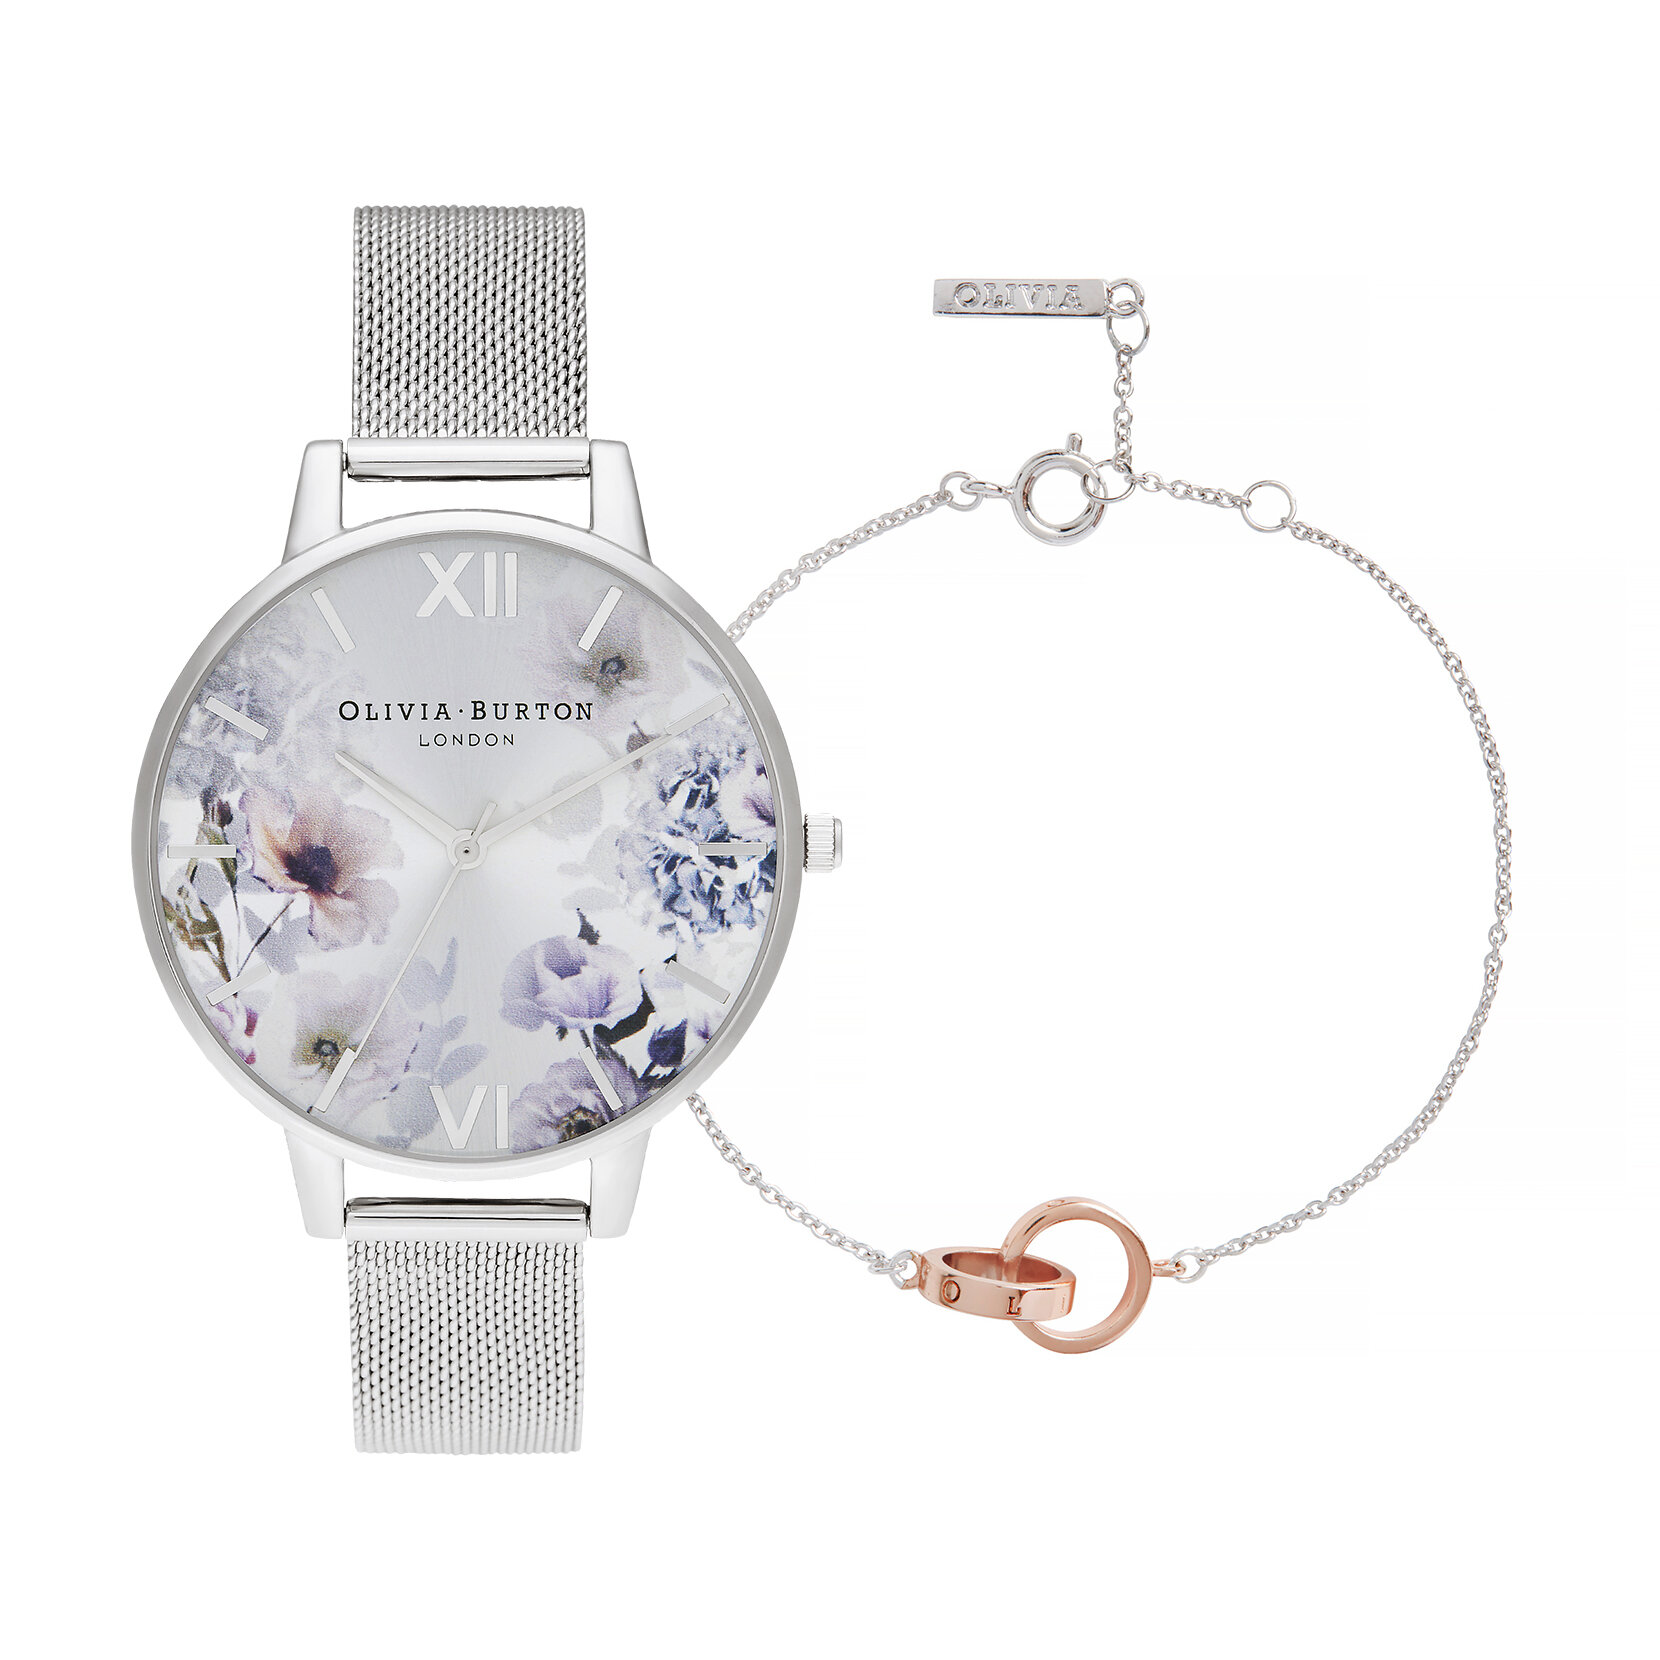 Sunlight Florals Silver Mesh Watch and Classics Silver and Rose Gold Bracelet Gift Set